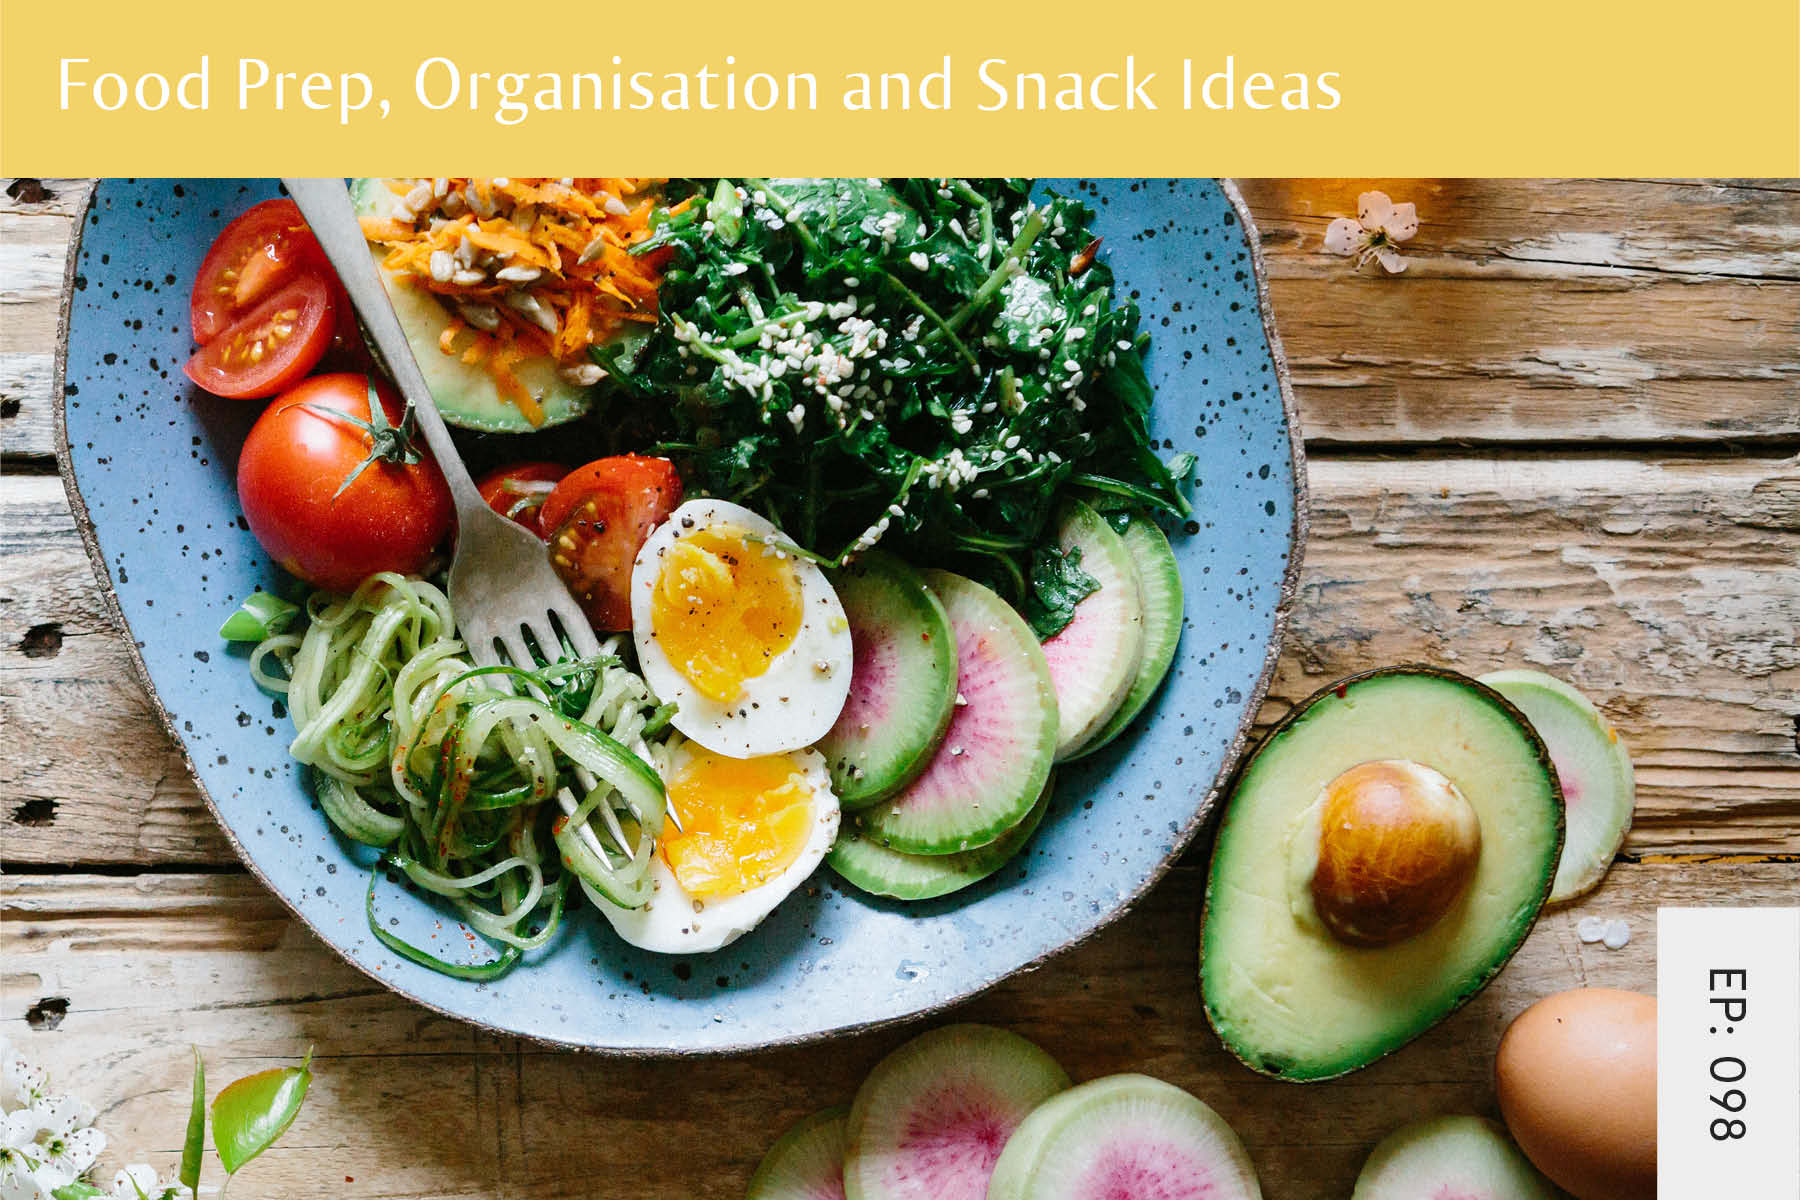 098: Food Prep, Organisation and Snack Ideas - Seven Health: Eating Disorder Recovery and Anti Diet Nutritionist